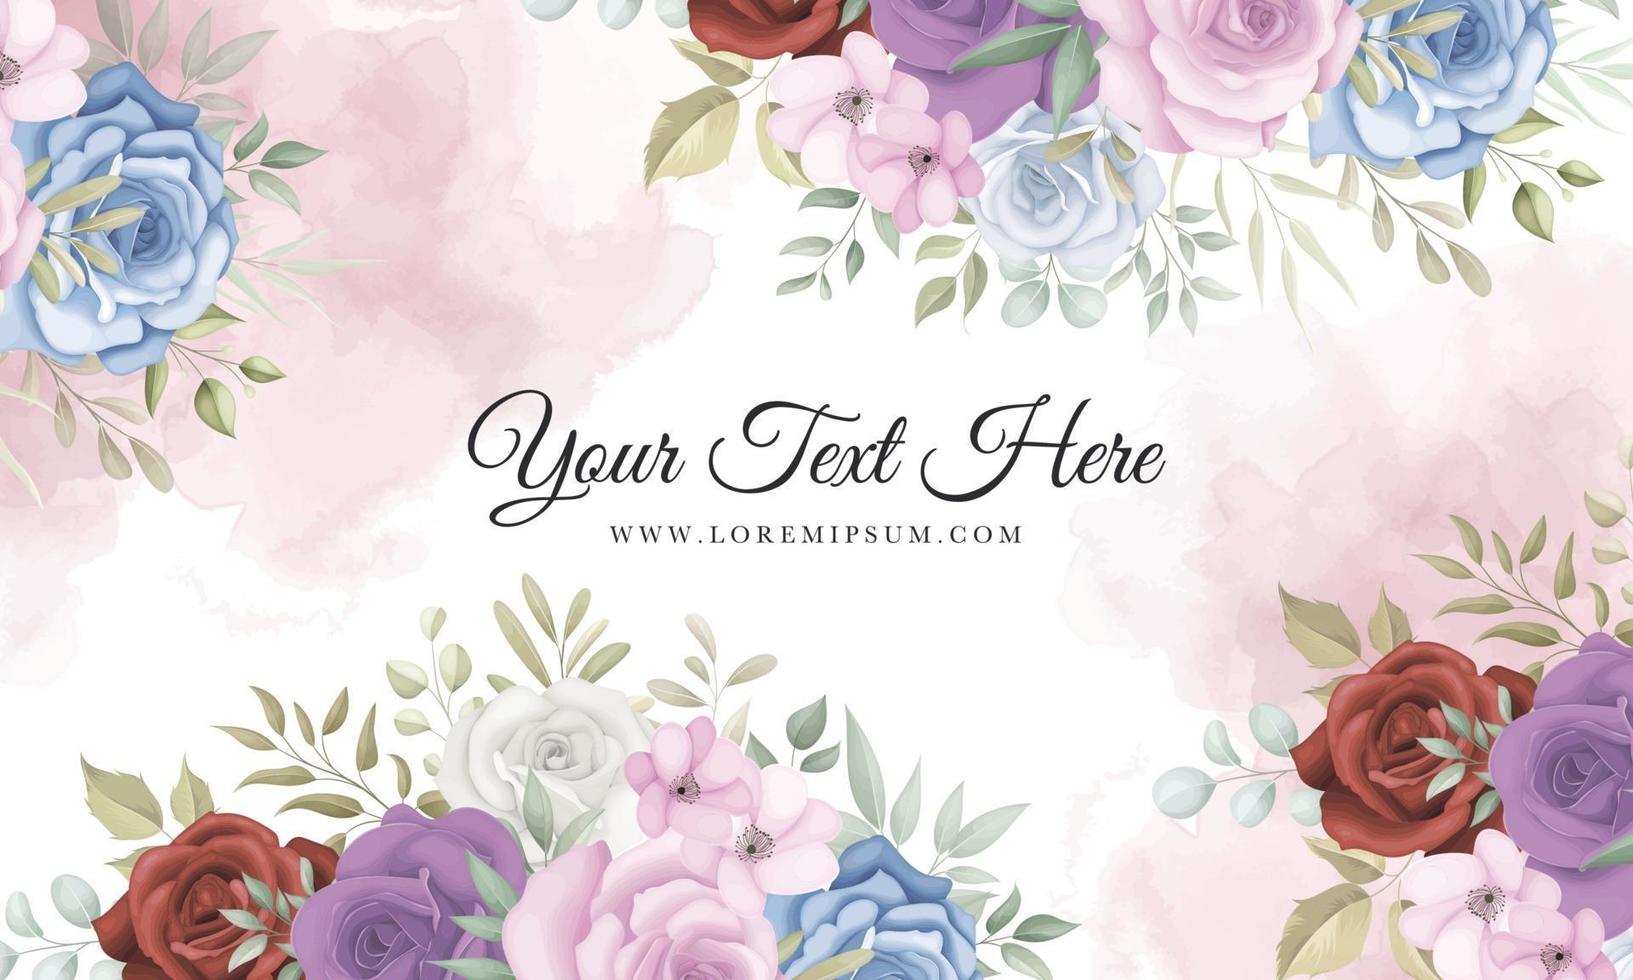 Elegant floral background with beautiful flowers vector